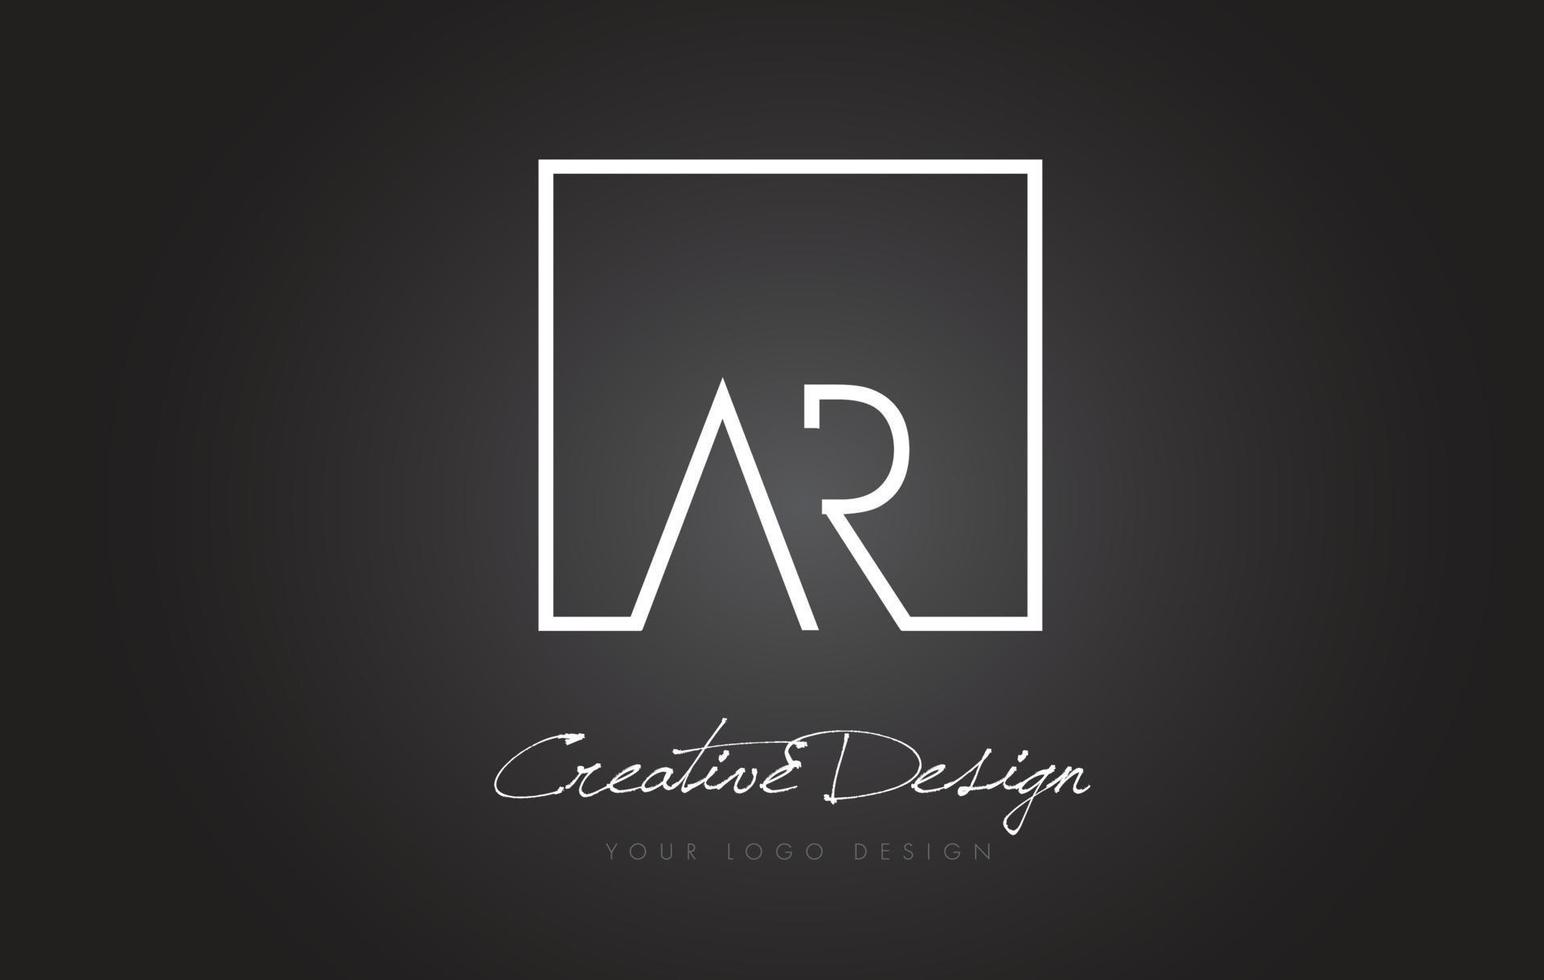 AR Square Frame Letter Logo Design with Black and White Colors. vector